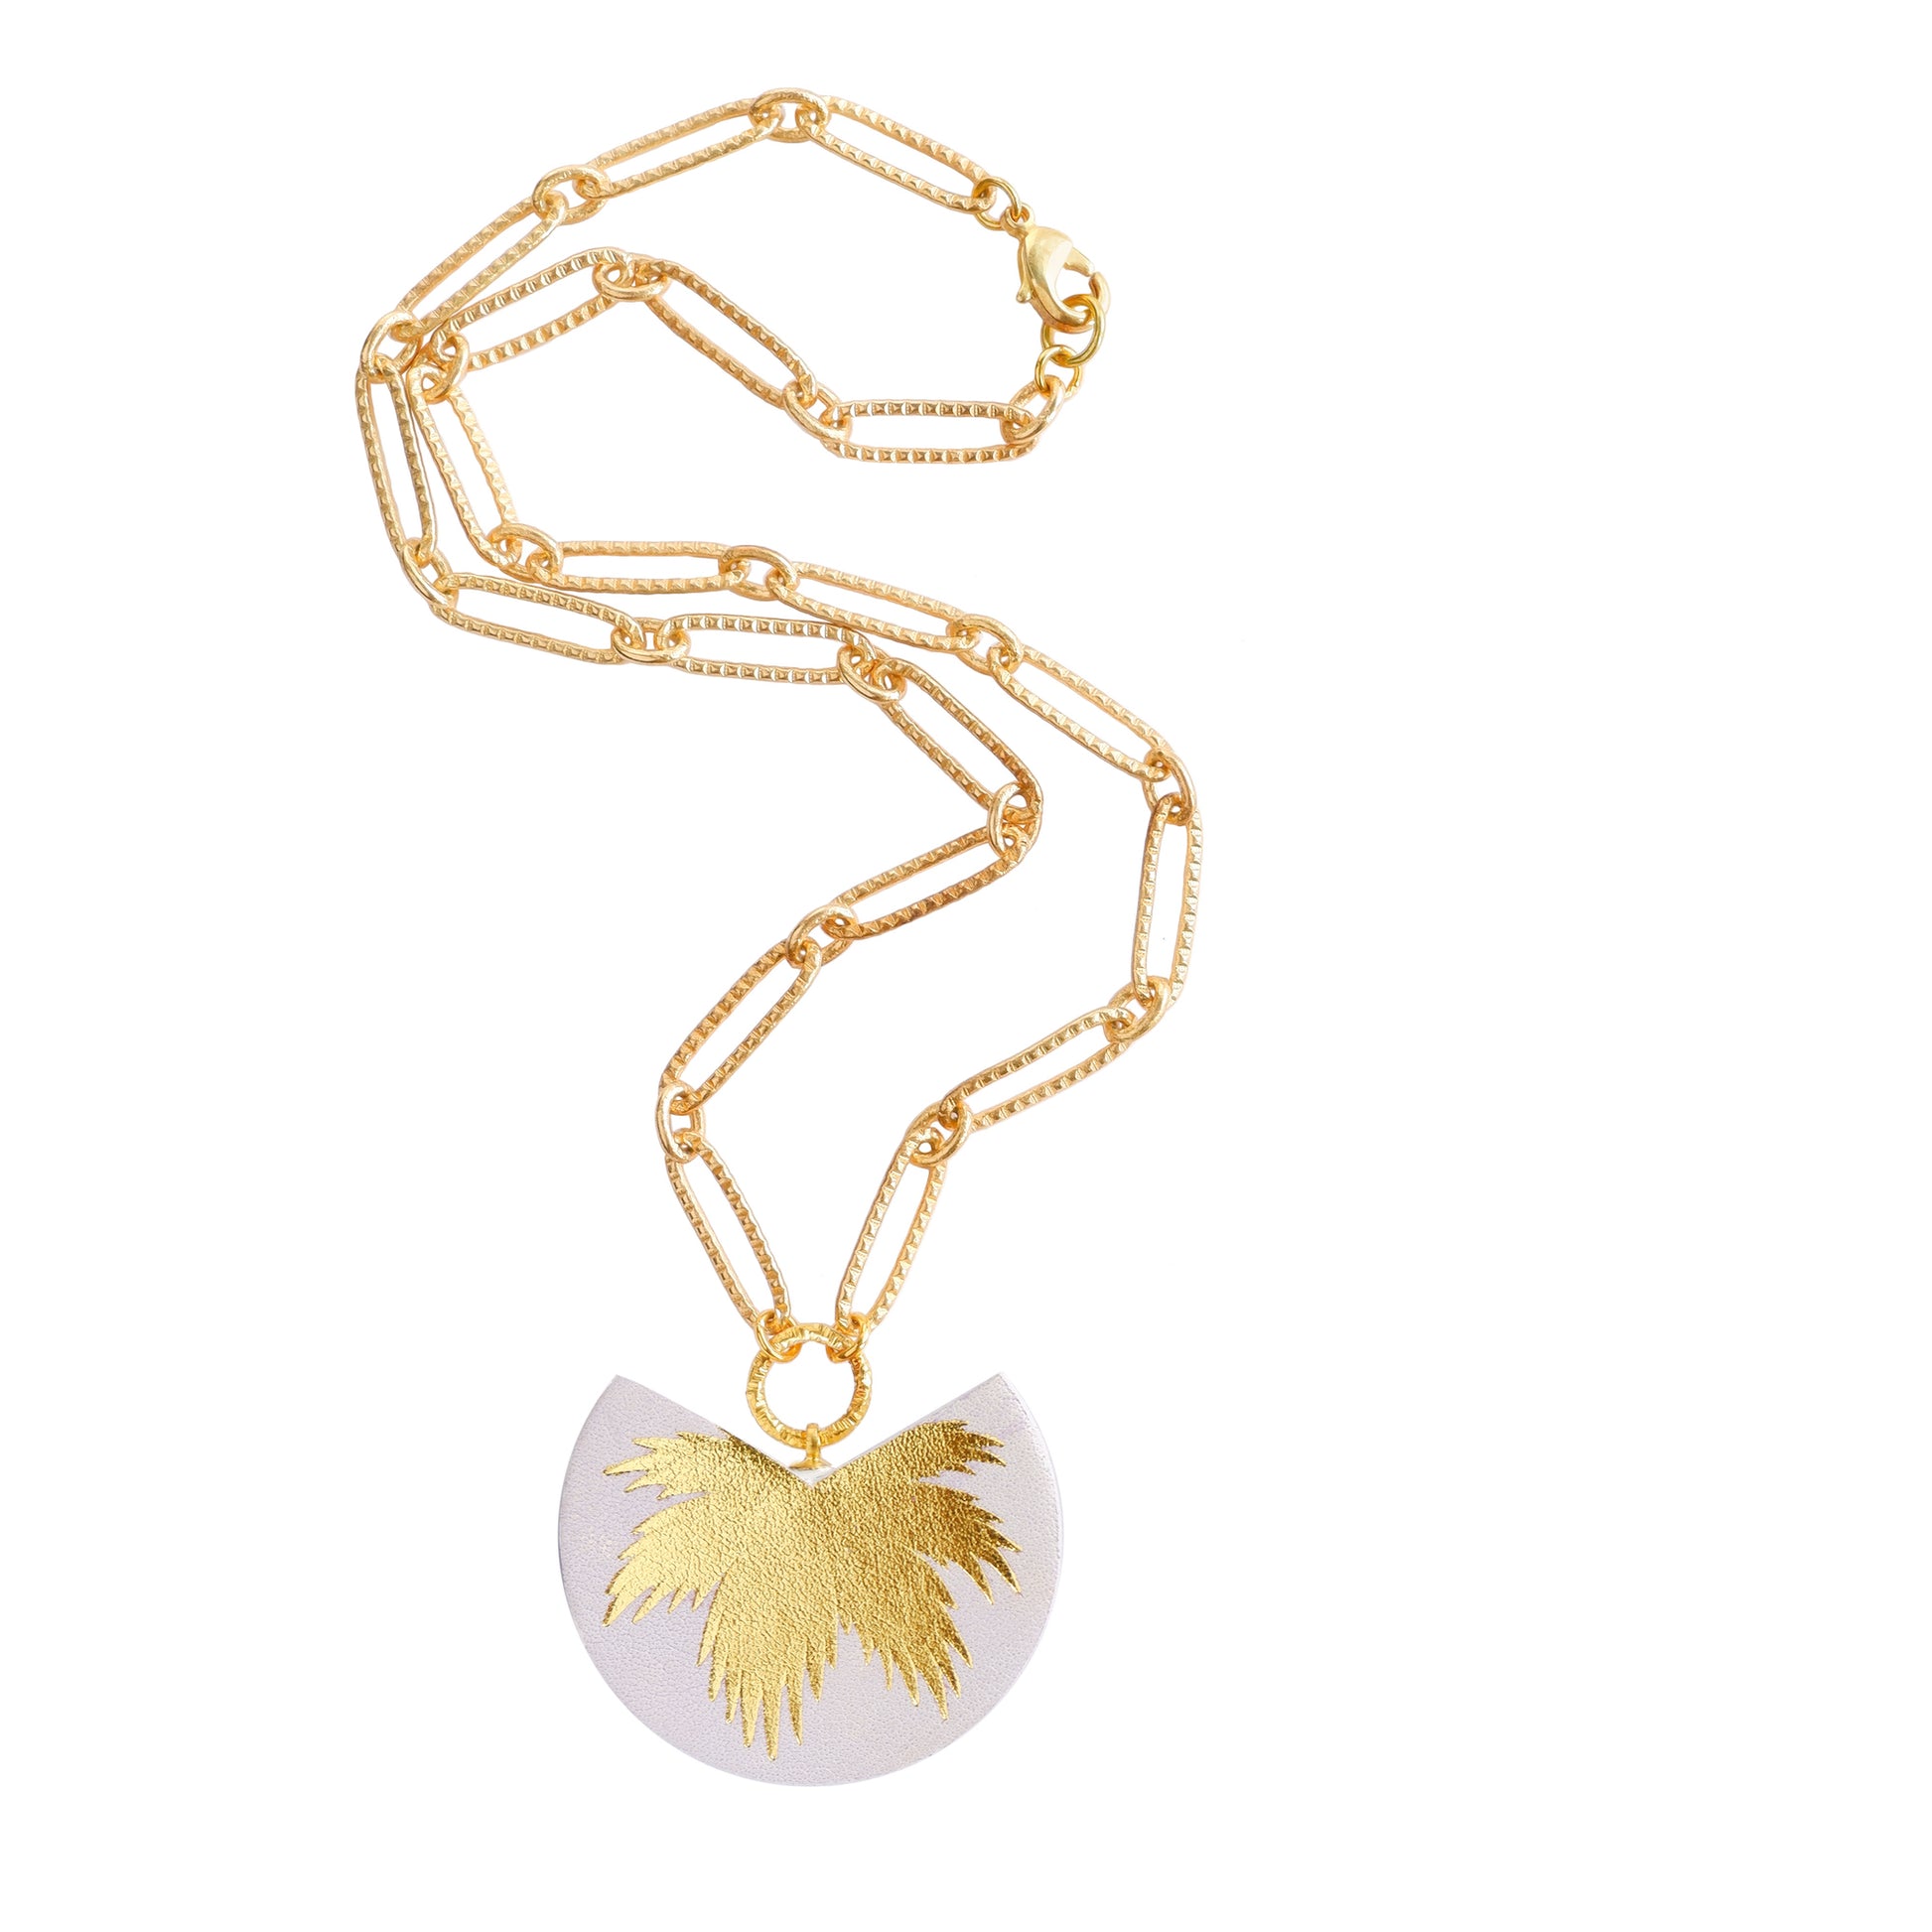 leather medallion pendant with gold palm tree print, on gold chain.